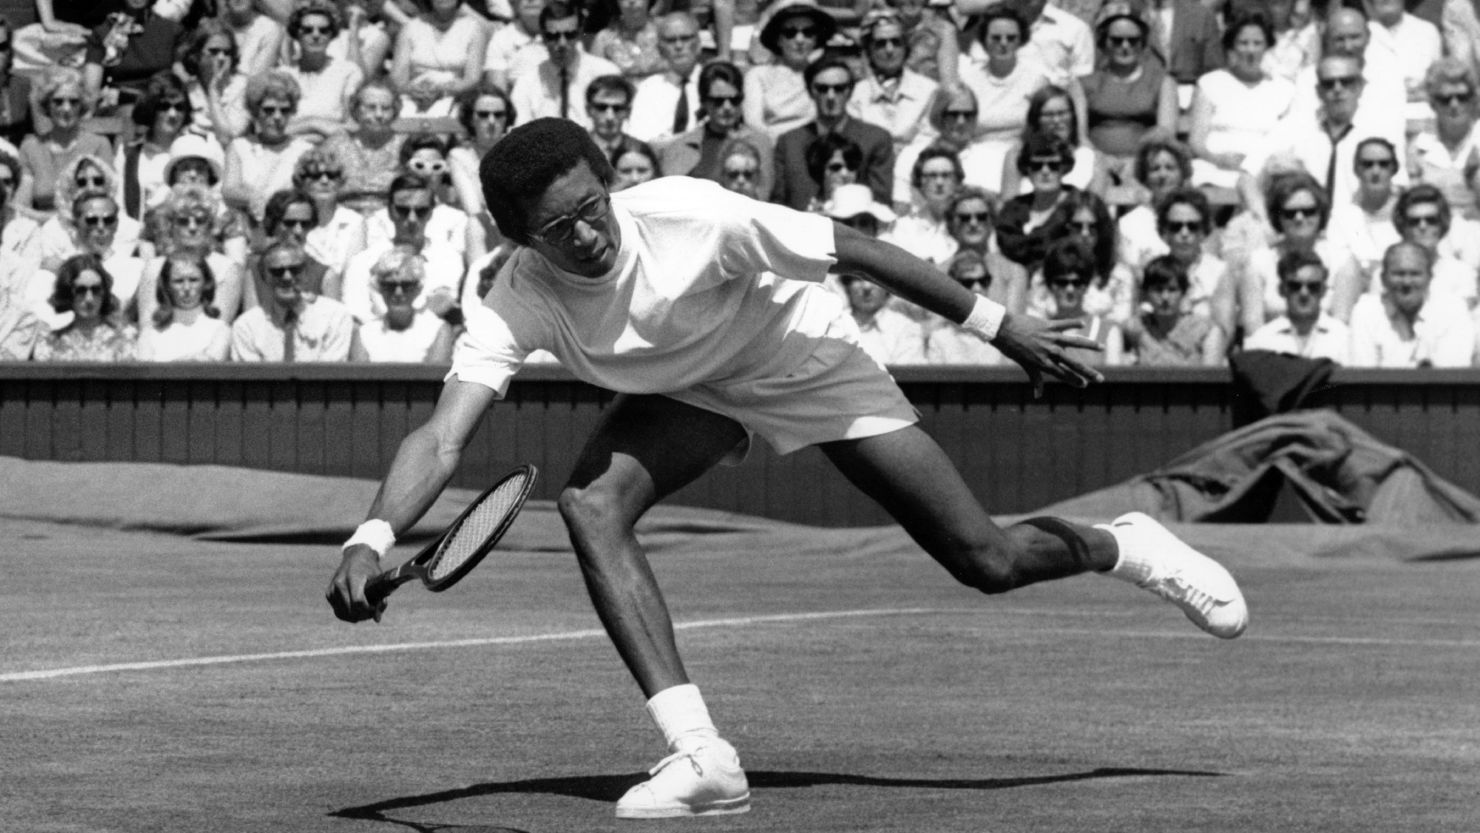 Arthur Ashe was the first black man to win the U.S. Open and Wimbledon.